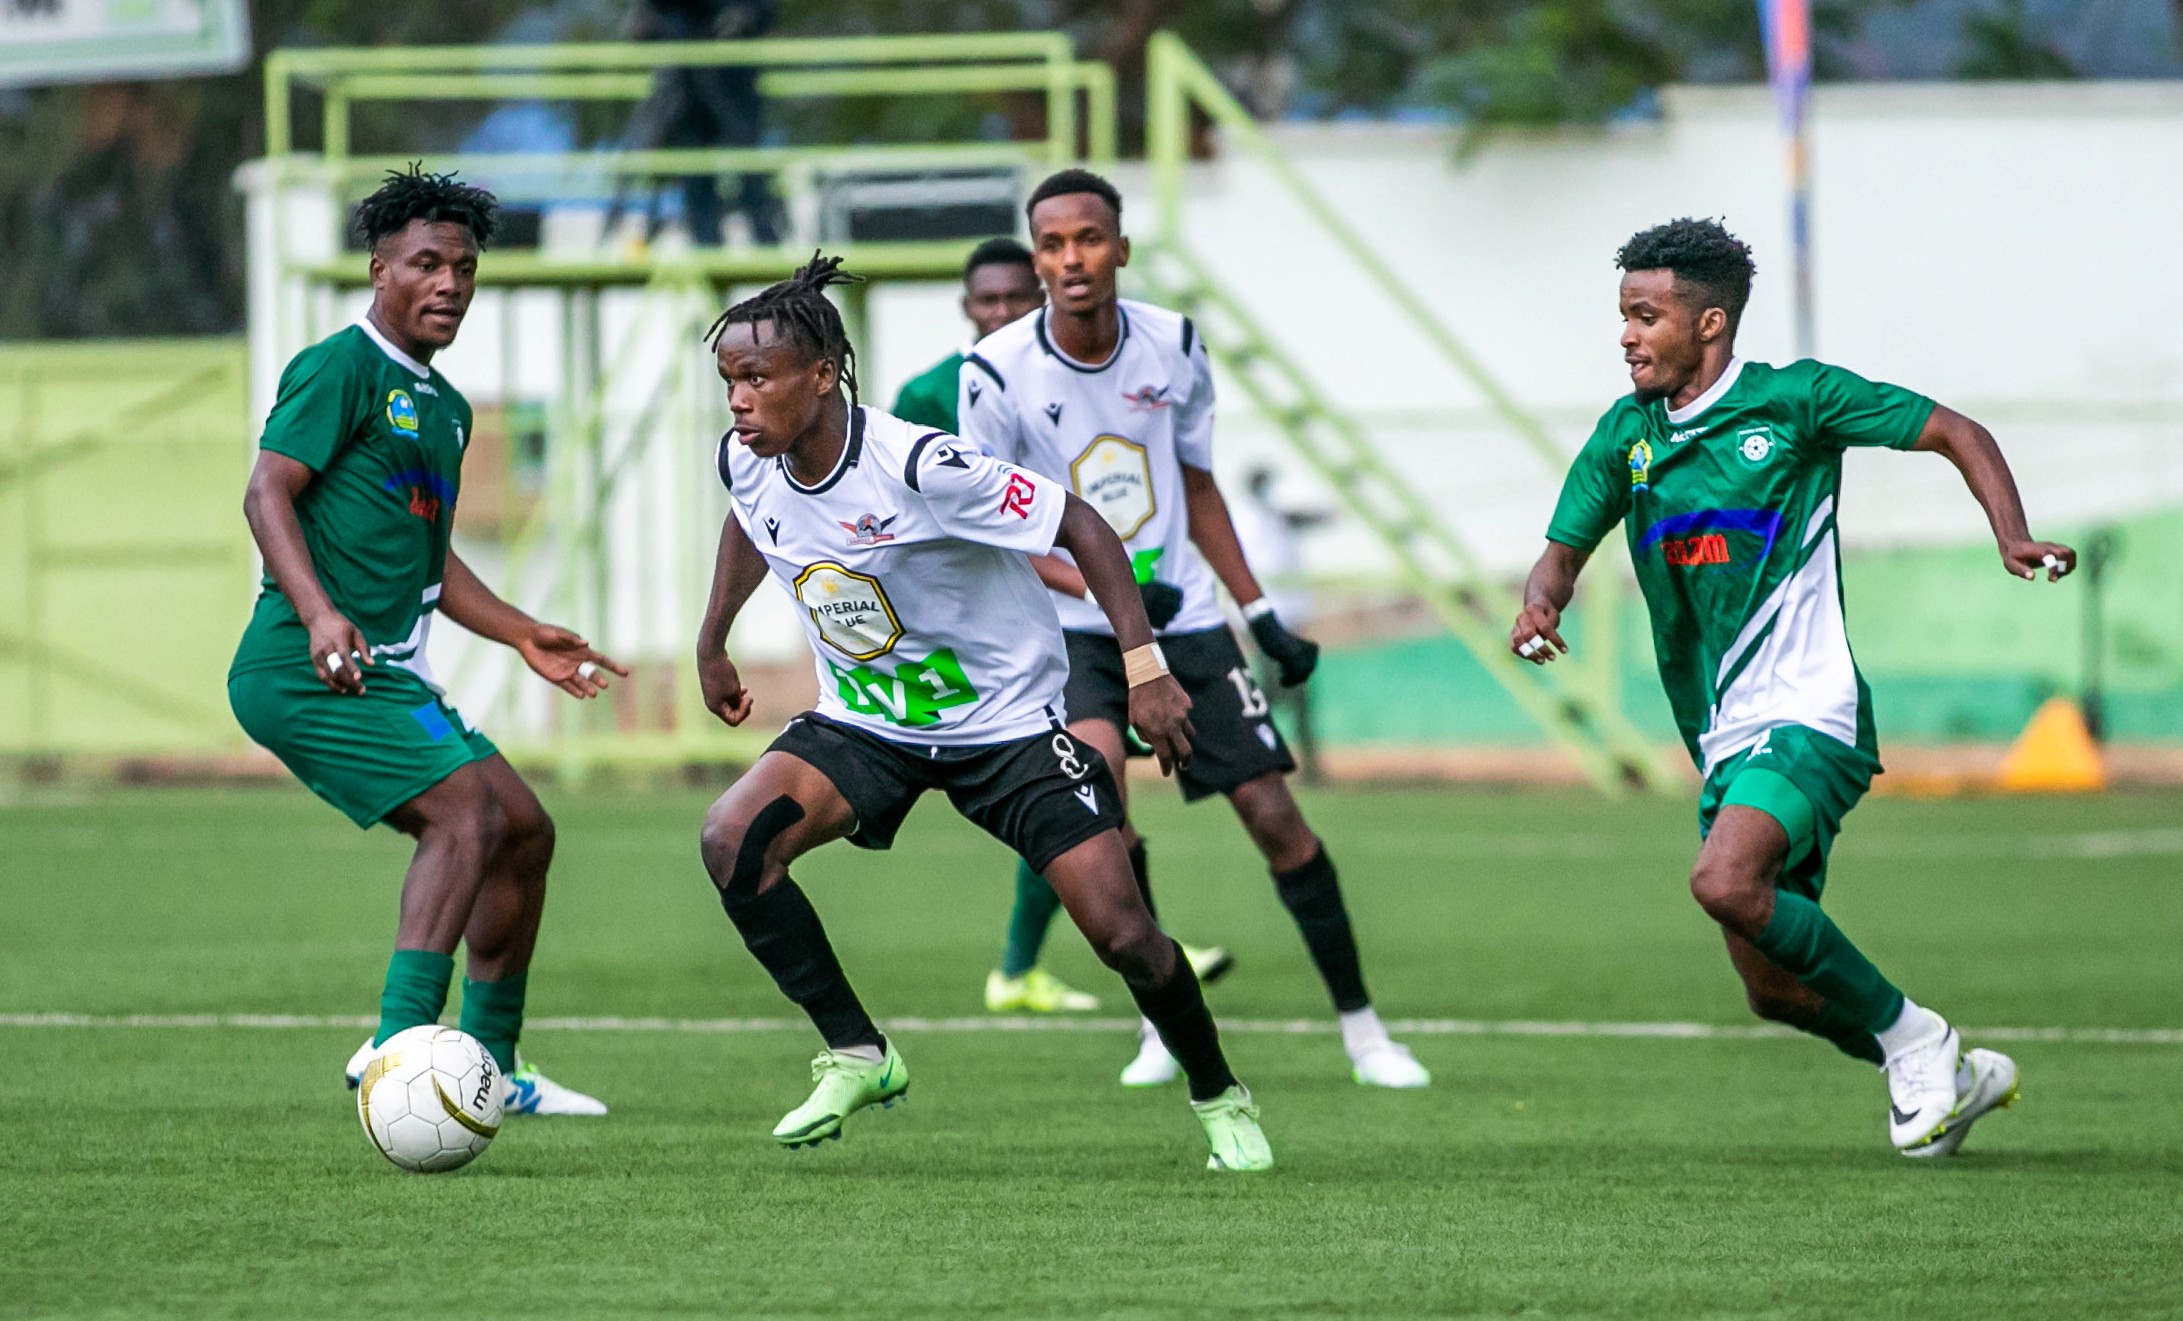 Gasogi players with the ball during the game against SC Kiyovu at Kigali stadium.The City of Kigali  announced that, effective with the 2022-23 season, Gasogi United will be among clubs they support. Olivier Mugwiza